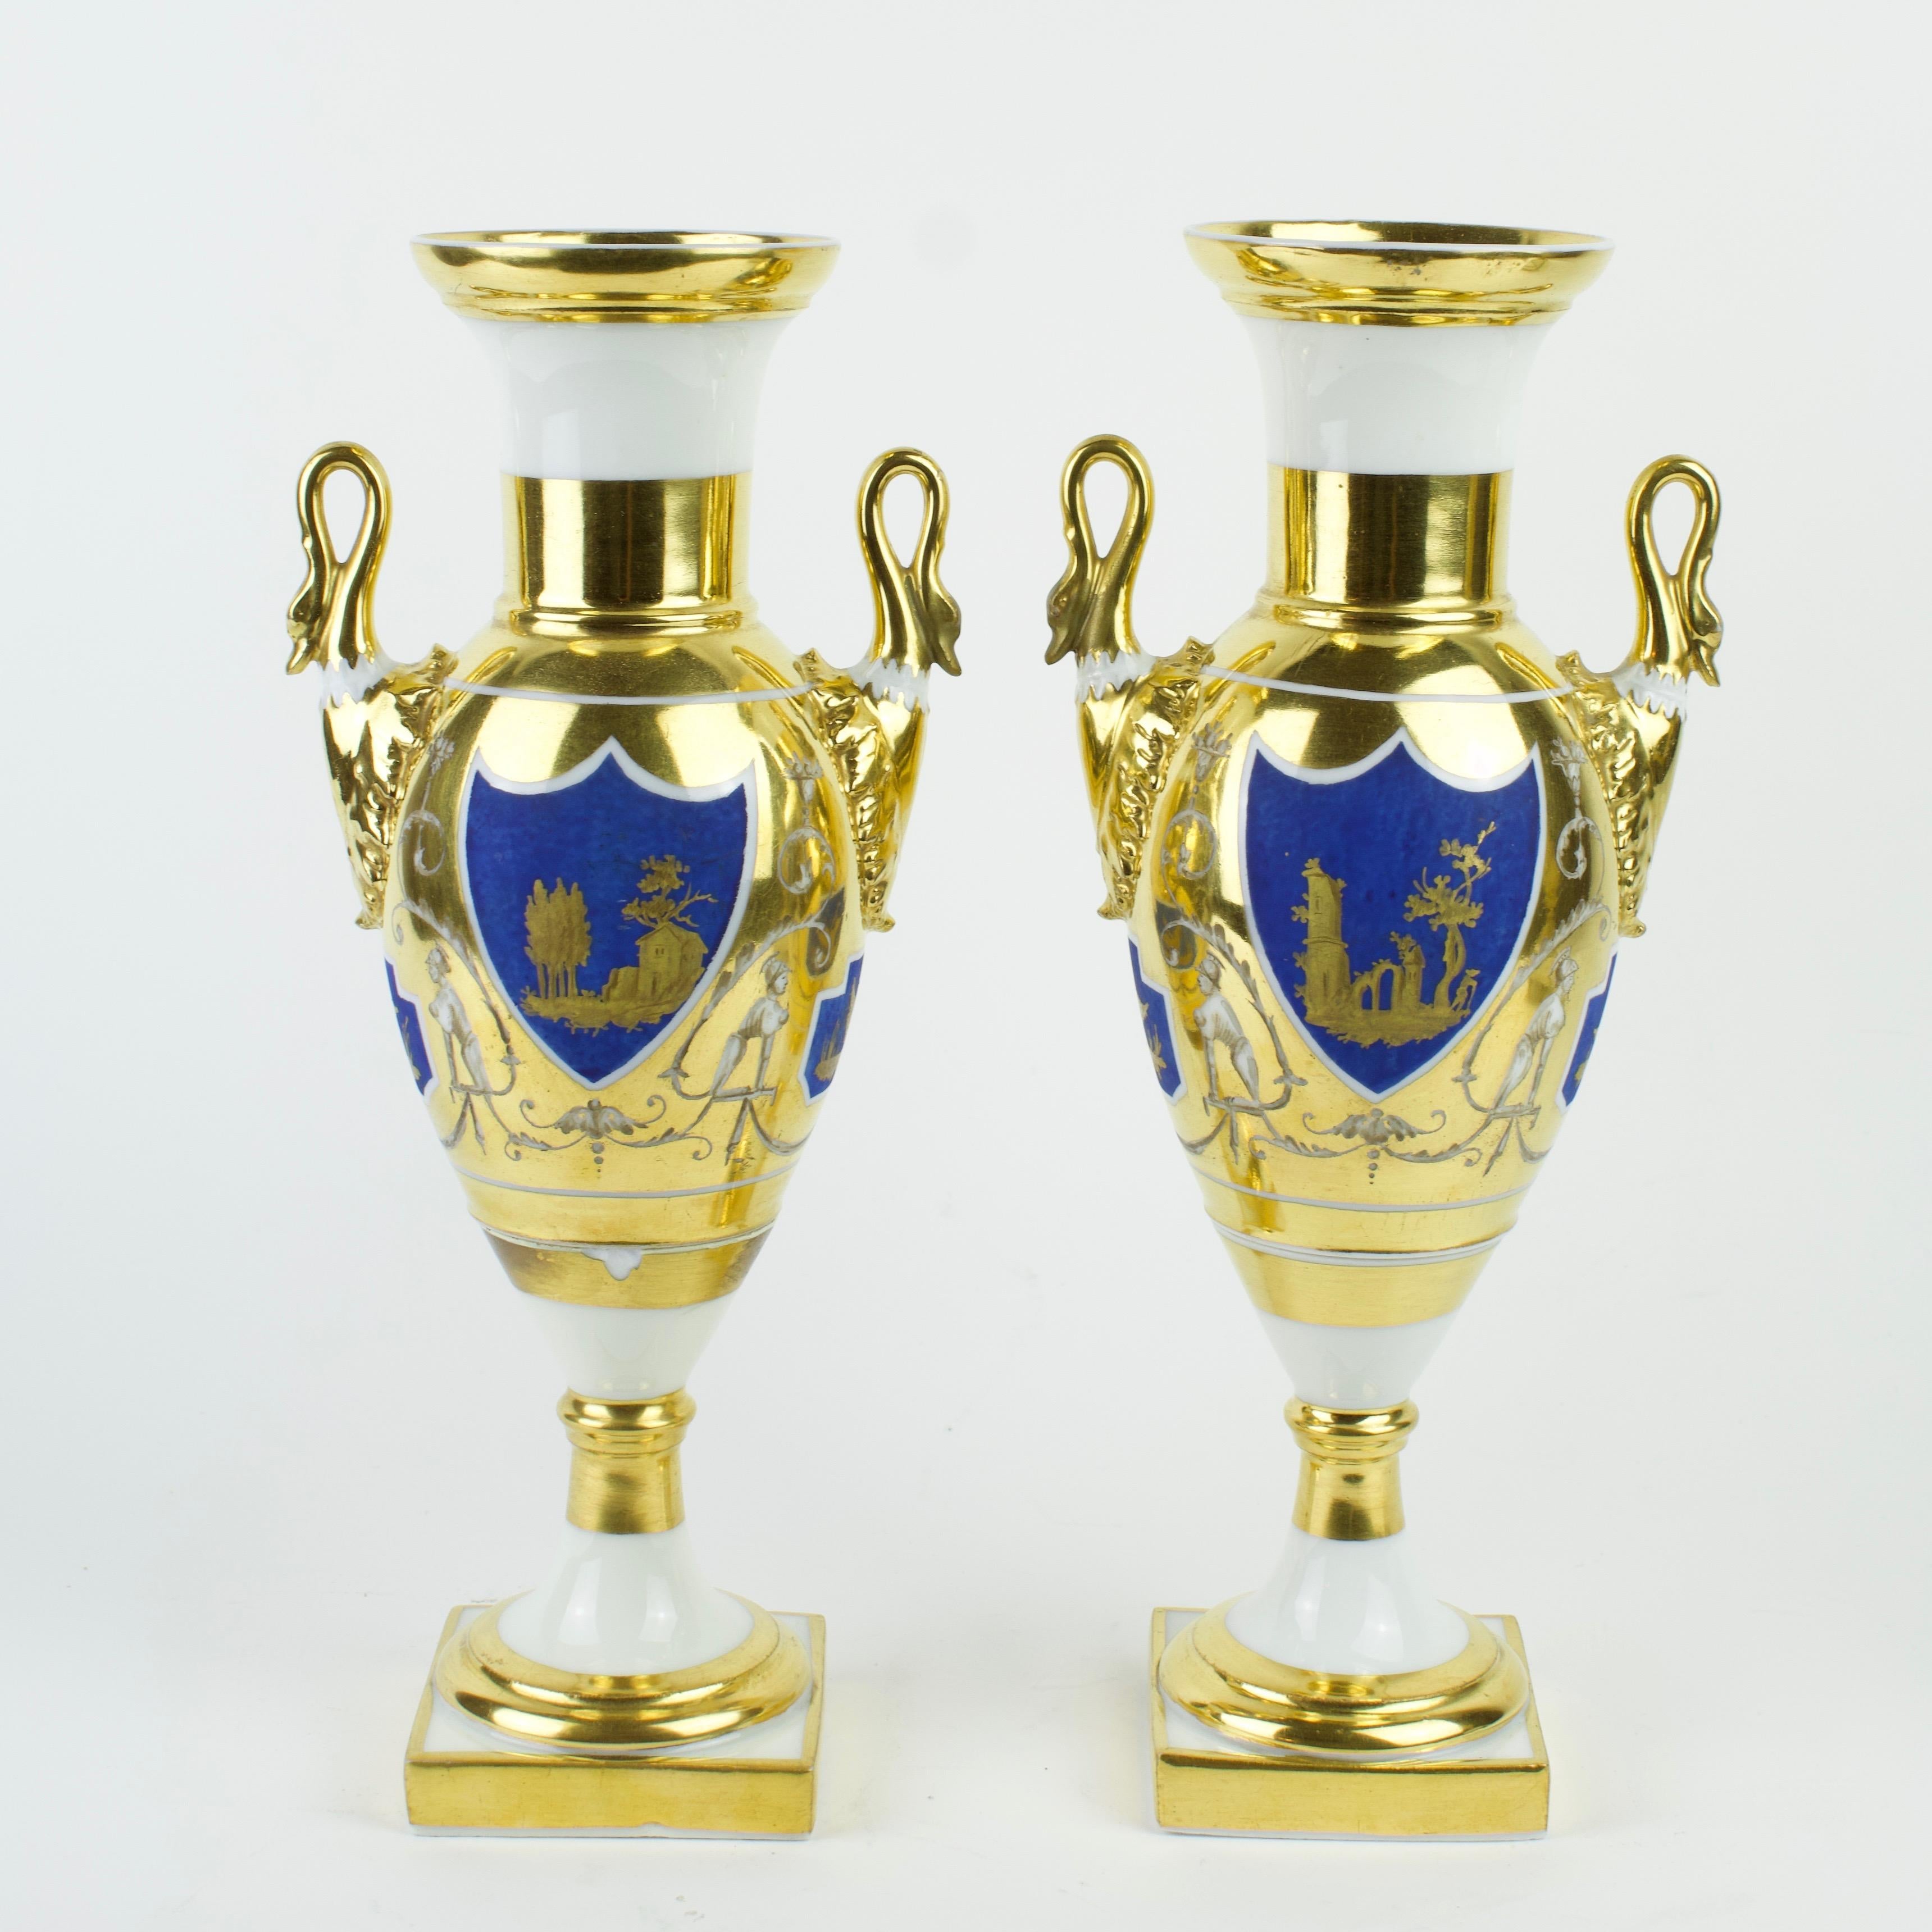 Pair of early 19th century French / Paris gilt and painted porcelain amphora vases

Ovoid body resting on a round foot with rectangular plinth; at the sides a pair of swan headed handles issuing from the body; long nack with broadend rim. White